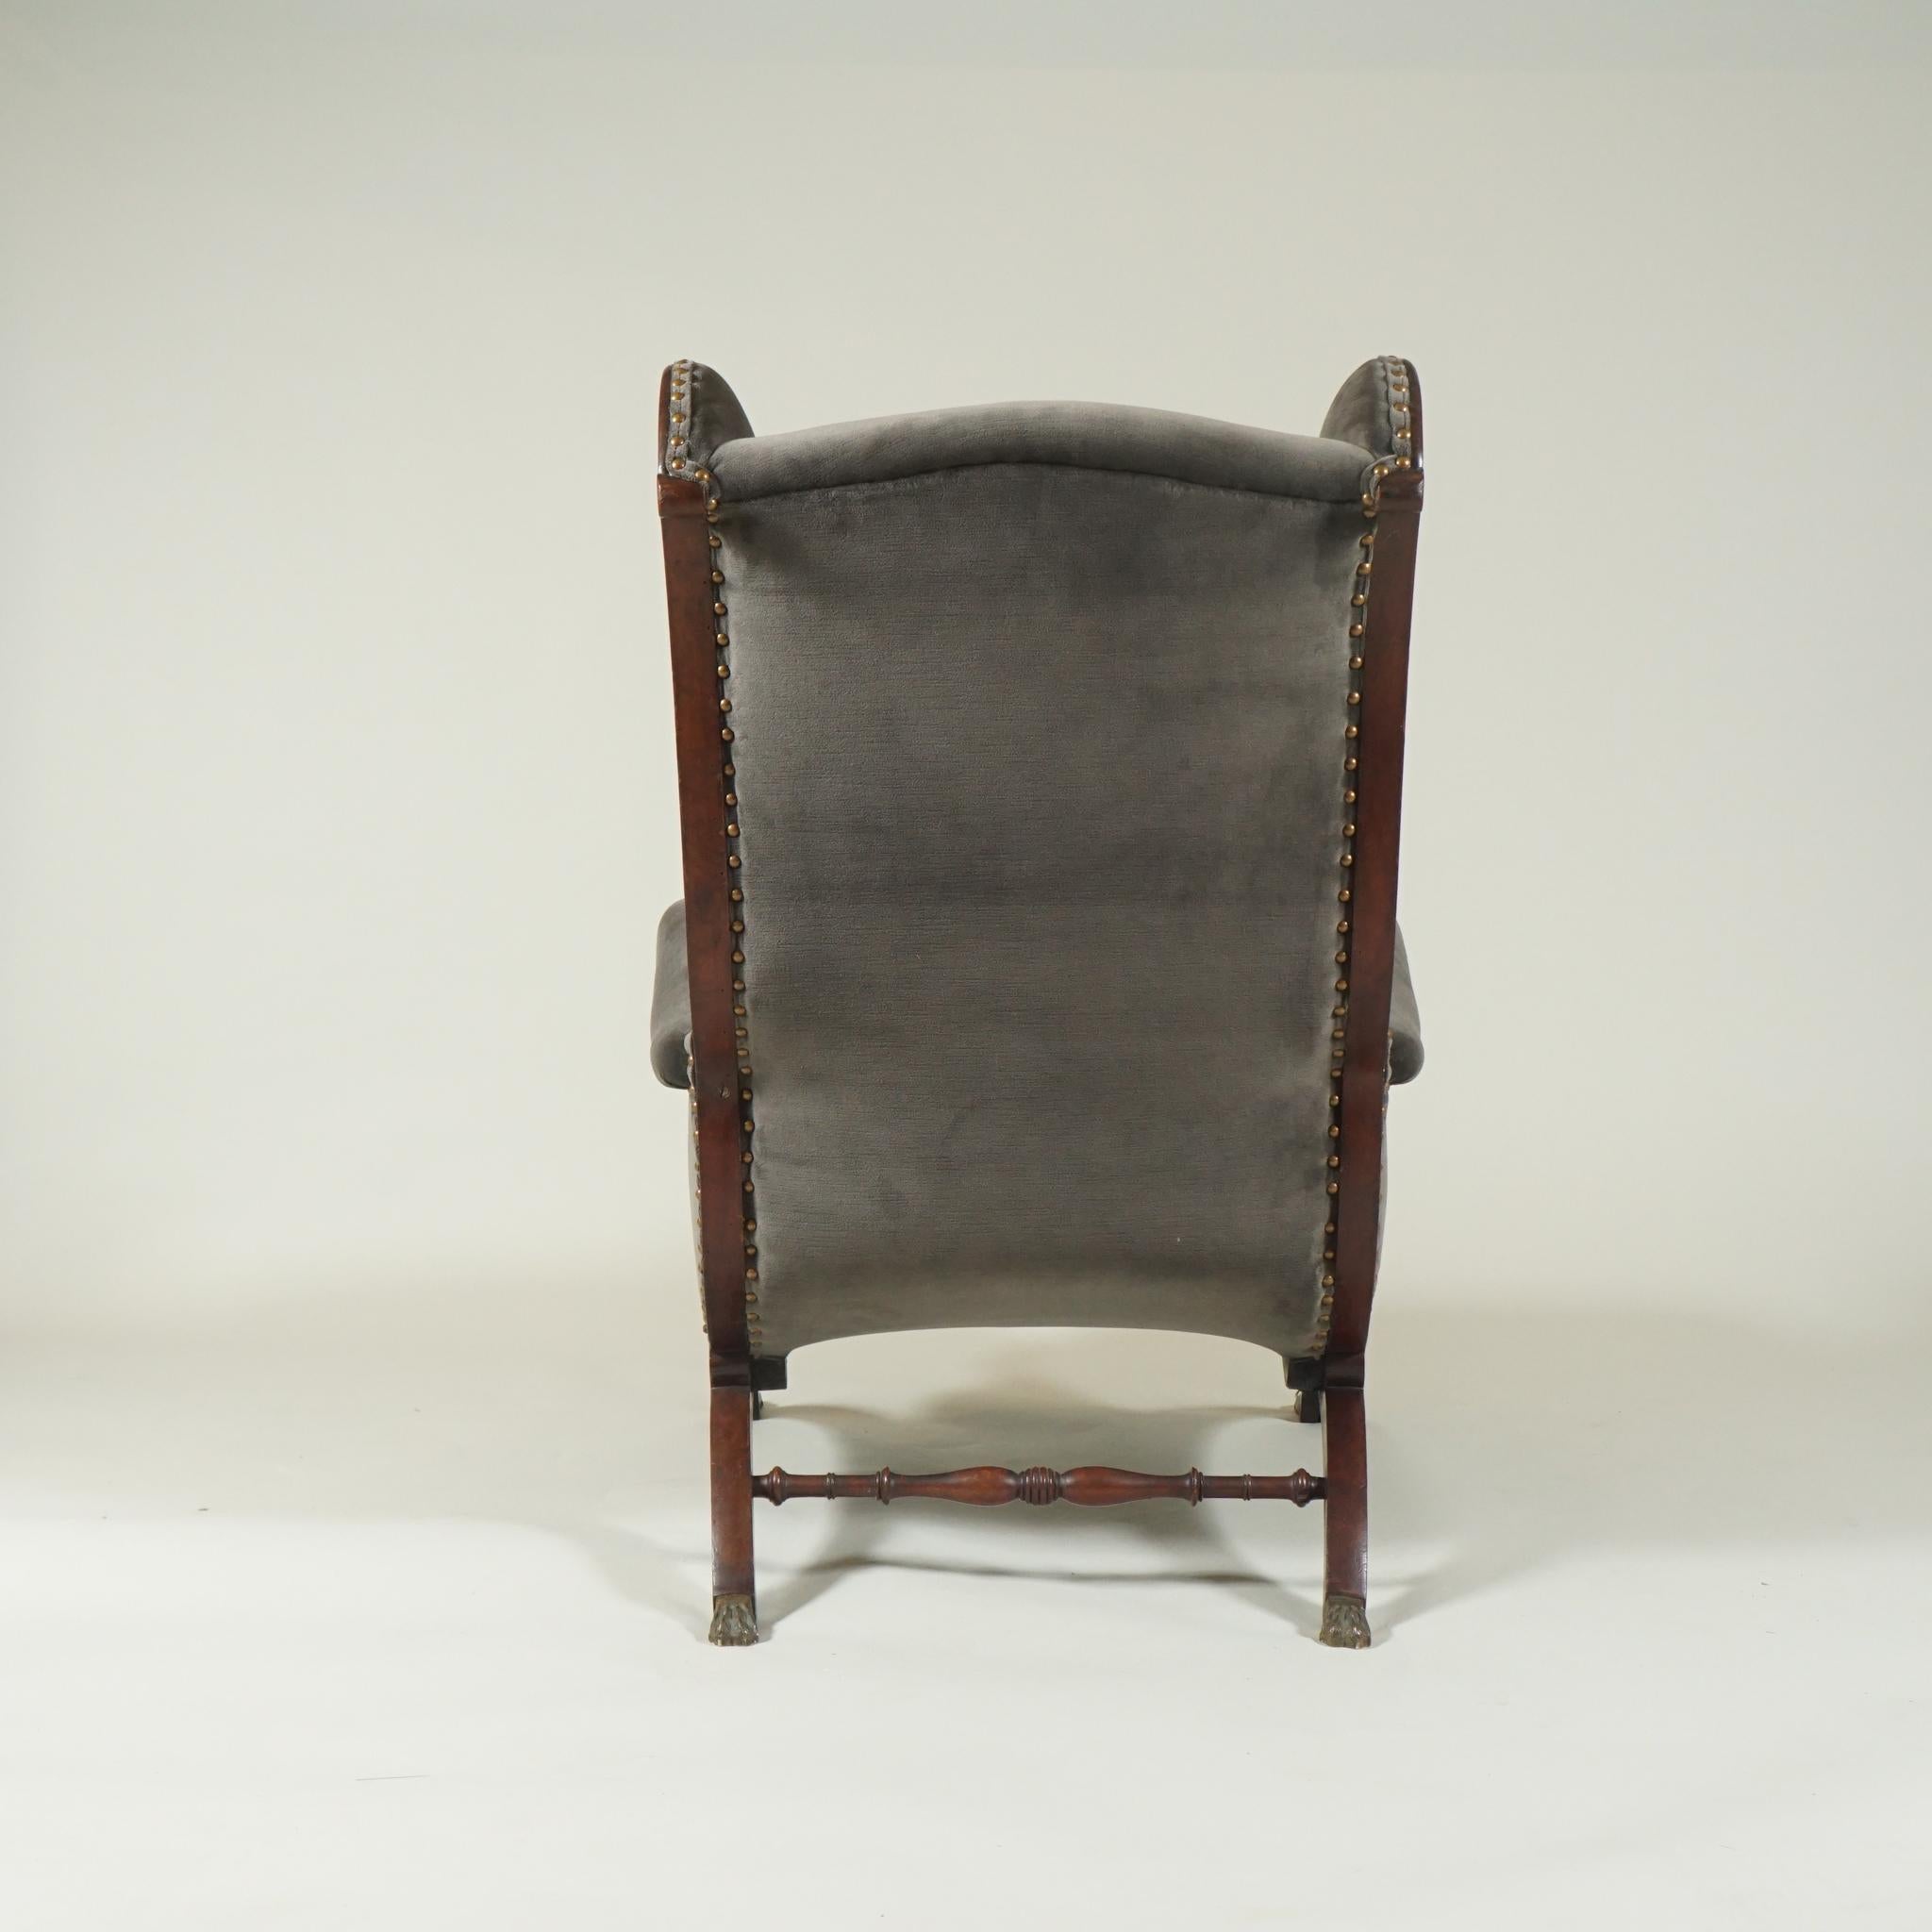 Hand-Crafted Victorian Lounge Chair